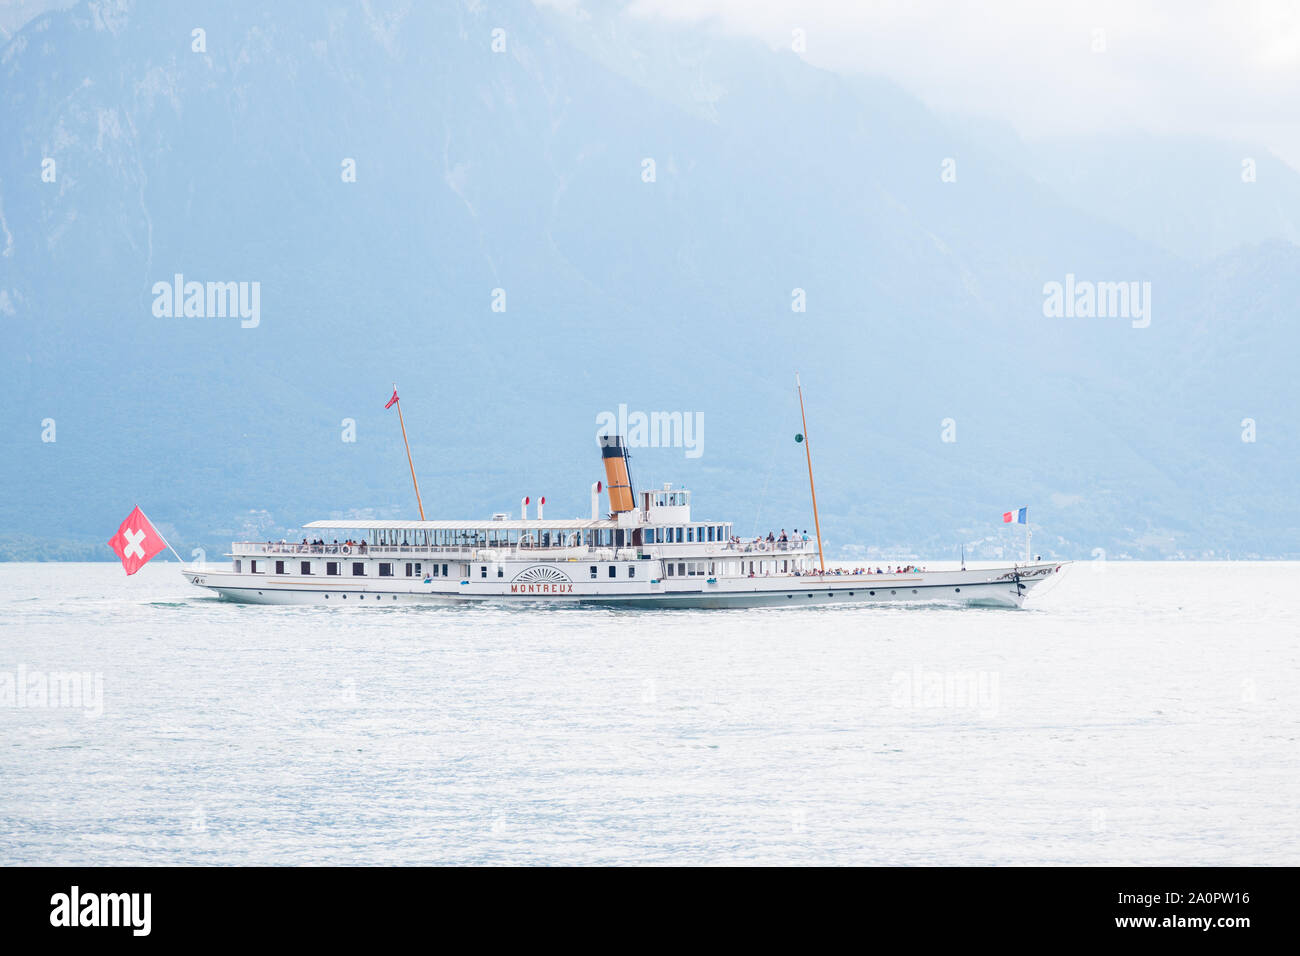 The oldest Belle Epoque steam paddle boat Montreux cruising on Lake Geneva (Lac Leman) on beautiful summer day Stock Photo